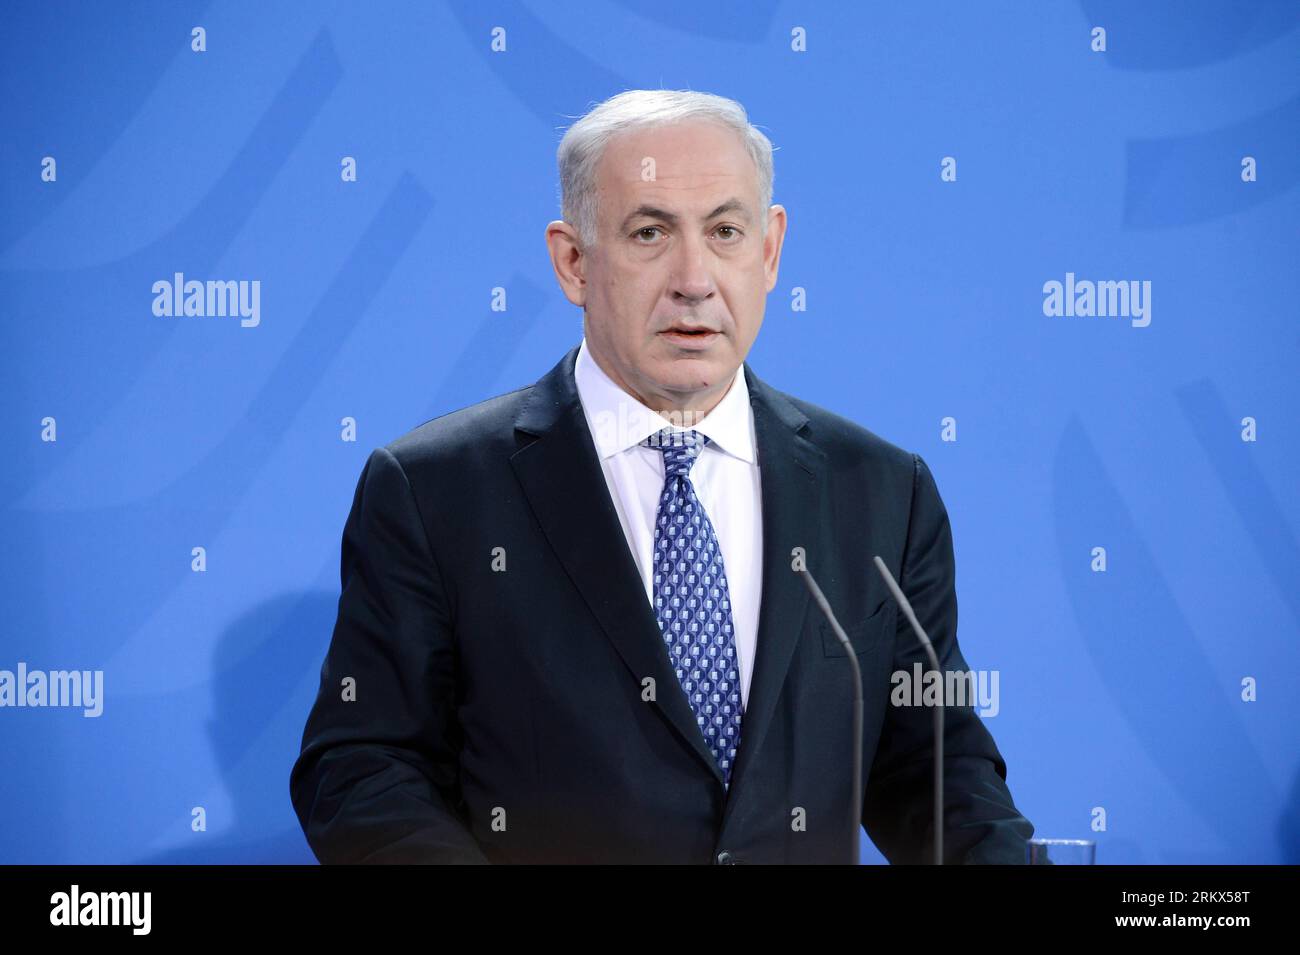 Bildnummer: 58891168  Datum: 06.12.2012  Copyright: imago/Xinhua (121206) -- BERLIN, Dec. 6, 2012 (Xinhua) -- Israeli Prime Minister Benjamin Netanyahu attends a joint press conference with German Chancellor Angela Merkel (not in the picture) after their meeting in Berlin, Germany, Dec. 6, 2012. Germany and Israel said on Thursday that their special and strategic relations could hardly be affected by their differences over the new Jewish settlement plans. (Xinhua/Goncalo Silva) GERMANY-ISRAEL-DIPLOMACY-JEWISH SETTLEMENT-PLANS PUBLICATIONxNOTxINxCHN People Politik PK Pressetermin Porträt Regier Stock Photo